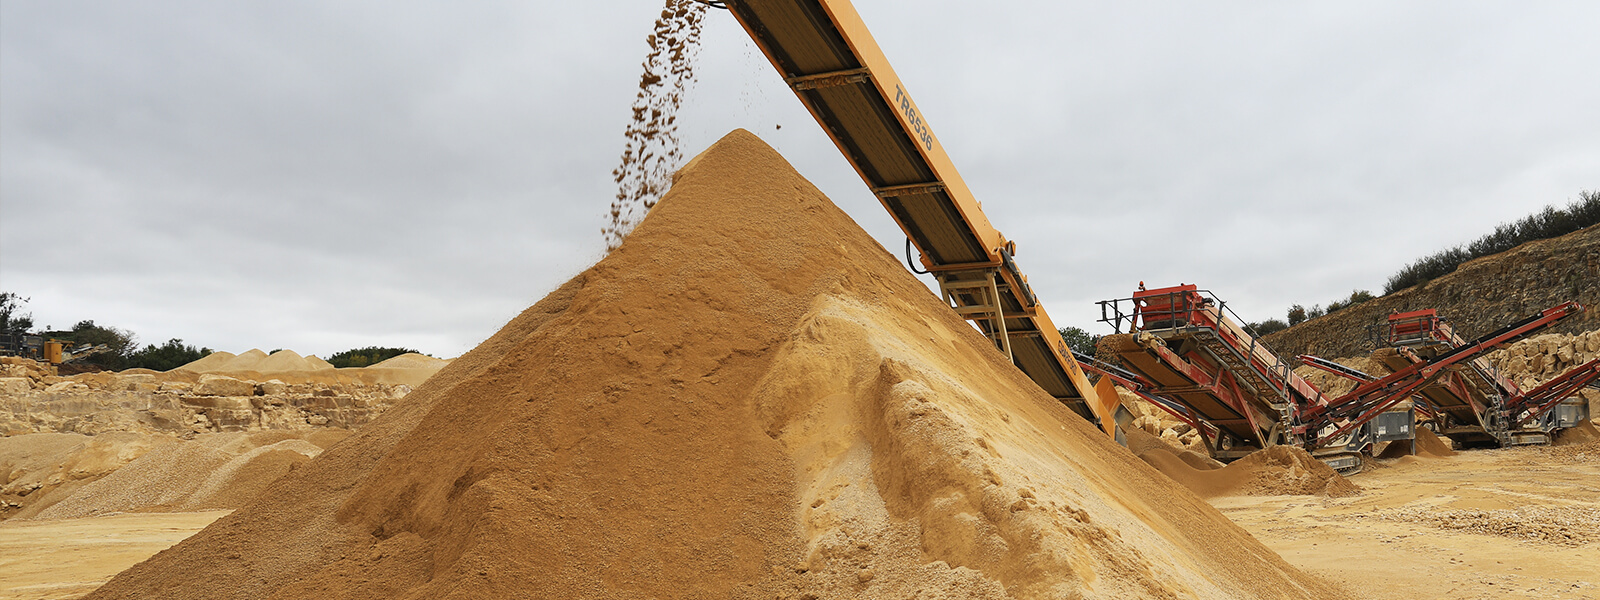 Guiting Agricultural Lime